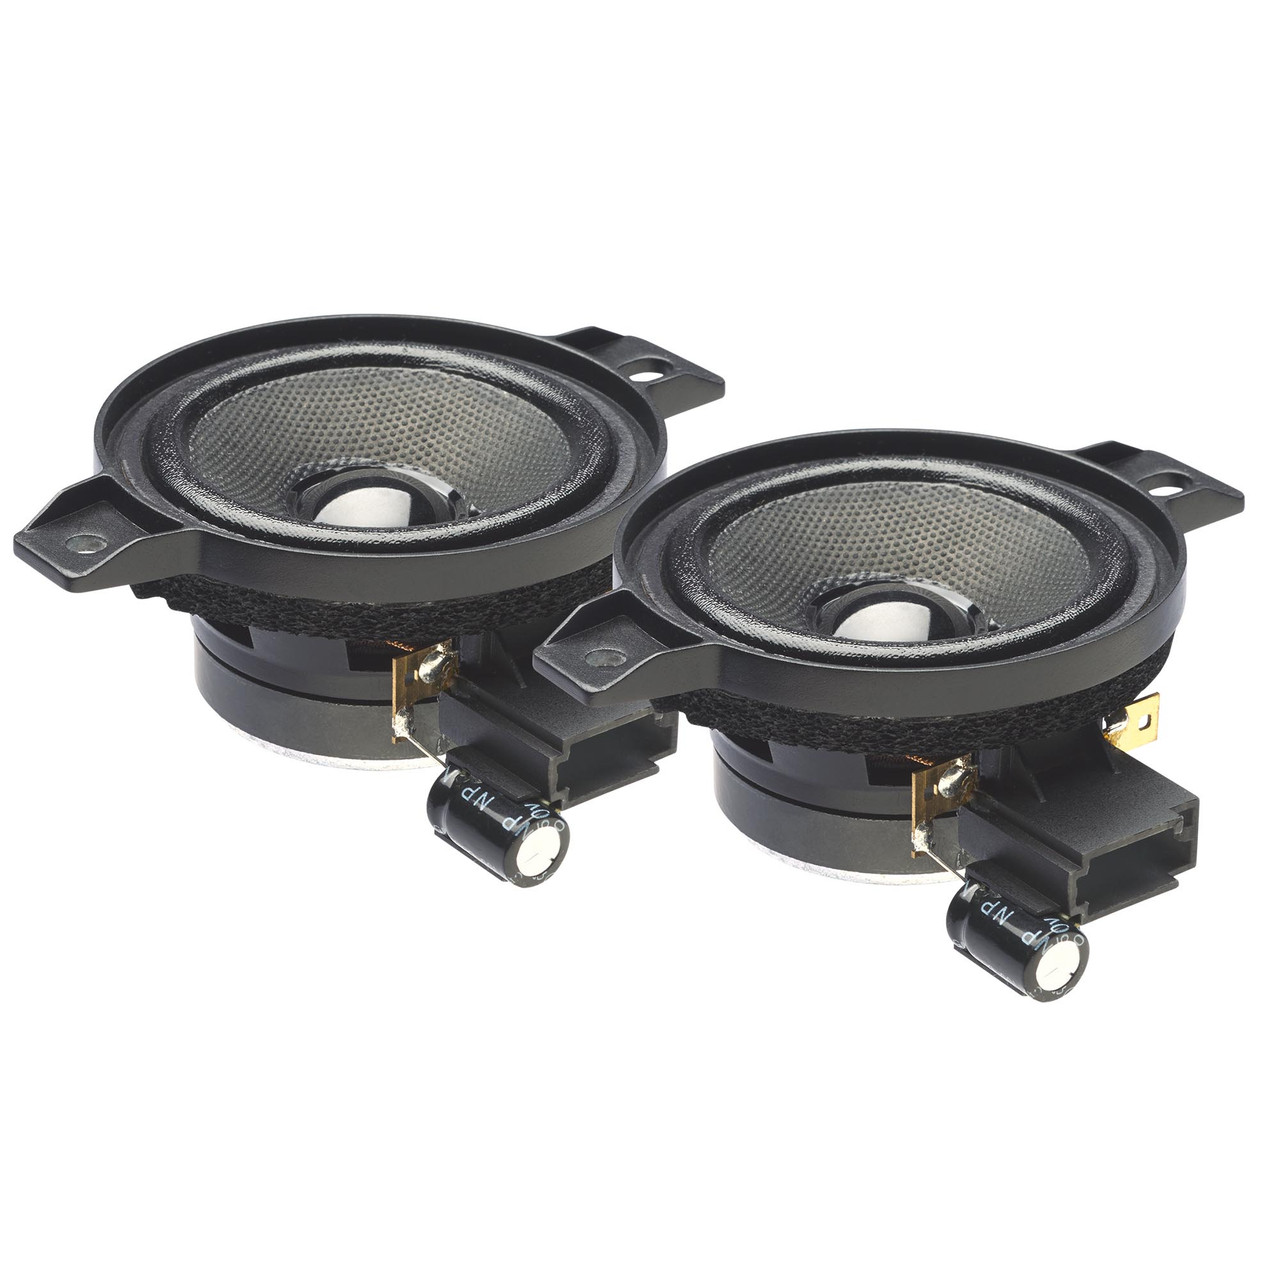 Forfærdeligt Efterforskning defekt Powerbass OE275-GM 2.75" Direct Fit OEM Replacement High Bandwidth Speakers  Compatible with Select Chevy/GMC Vehicles - Creative Audio